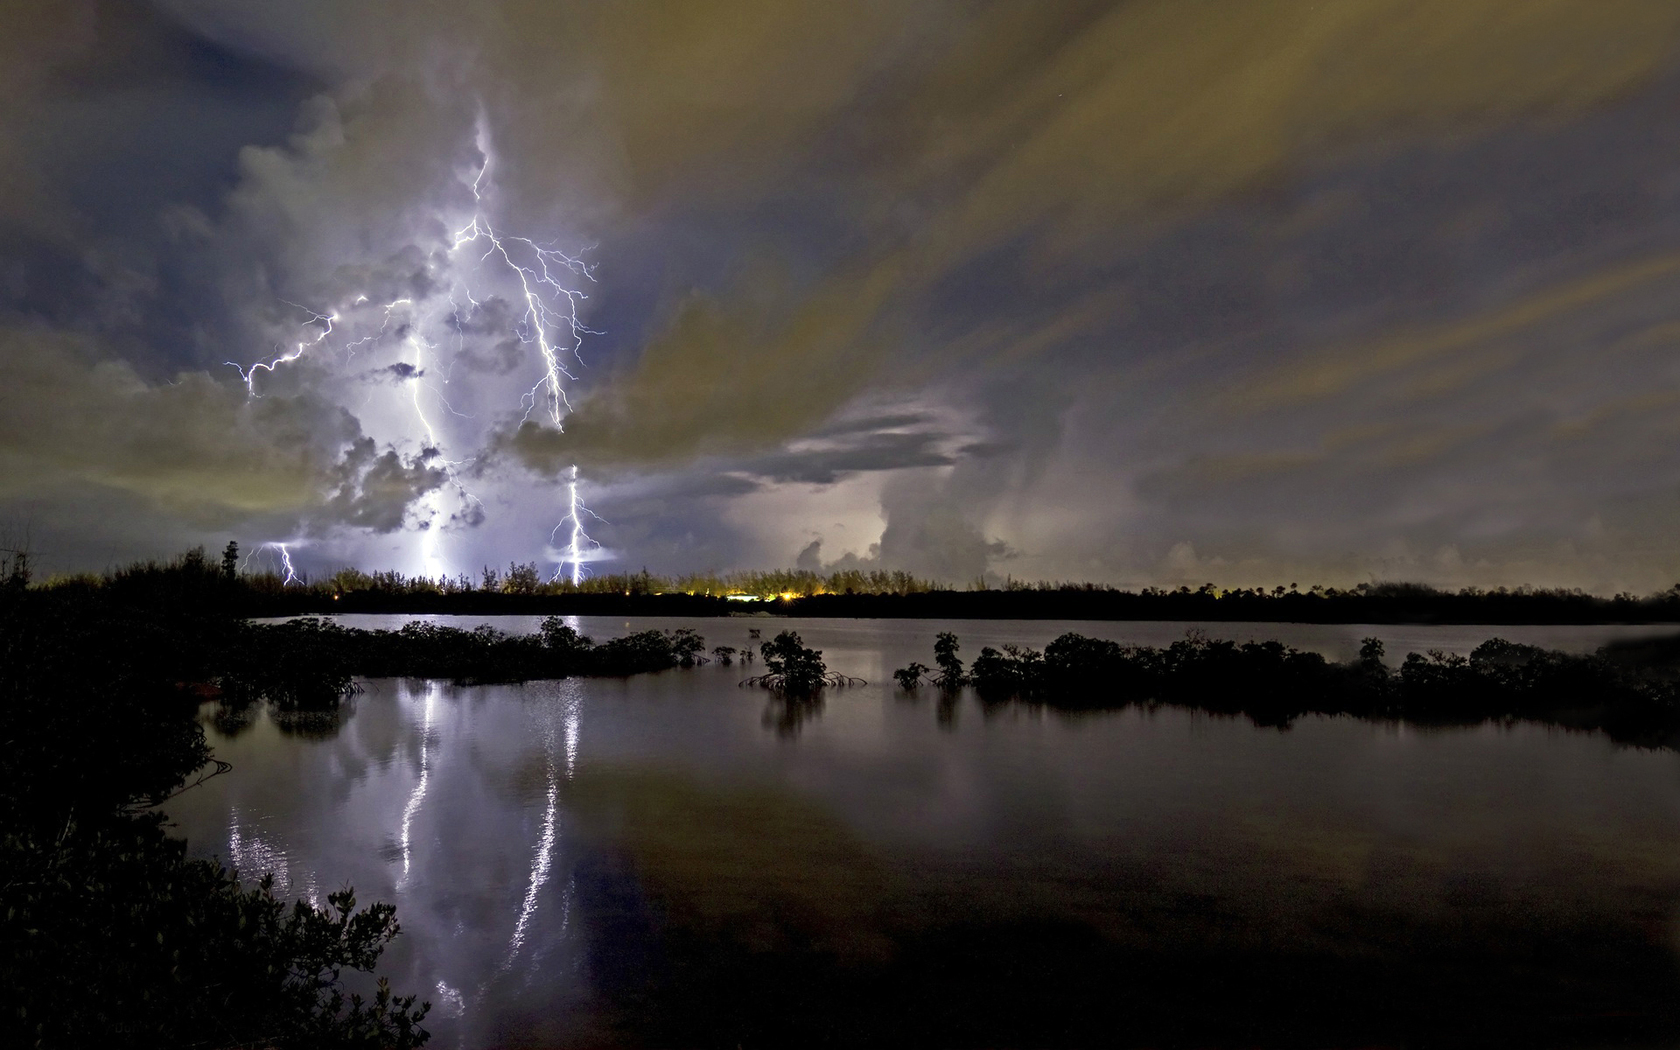 landscapes, Water, Lakes, Nature, Storms, Rain, Skies, Clouds, Lightning, Reflections Wallpaper